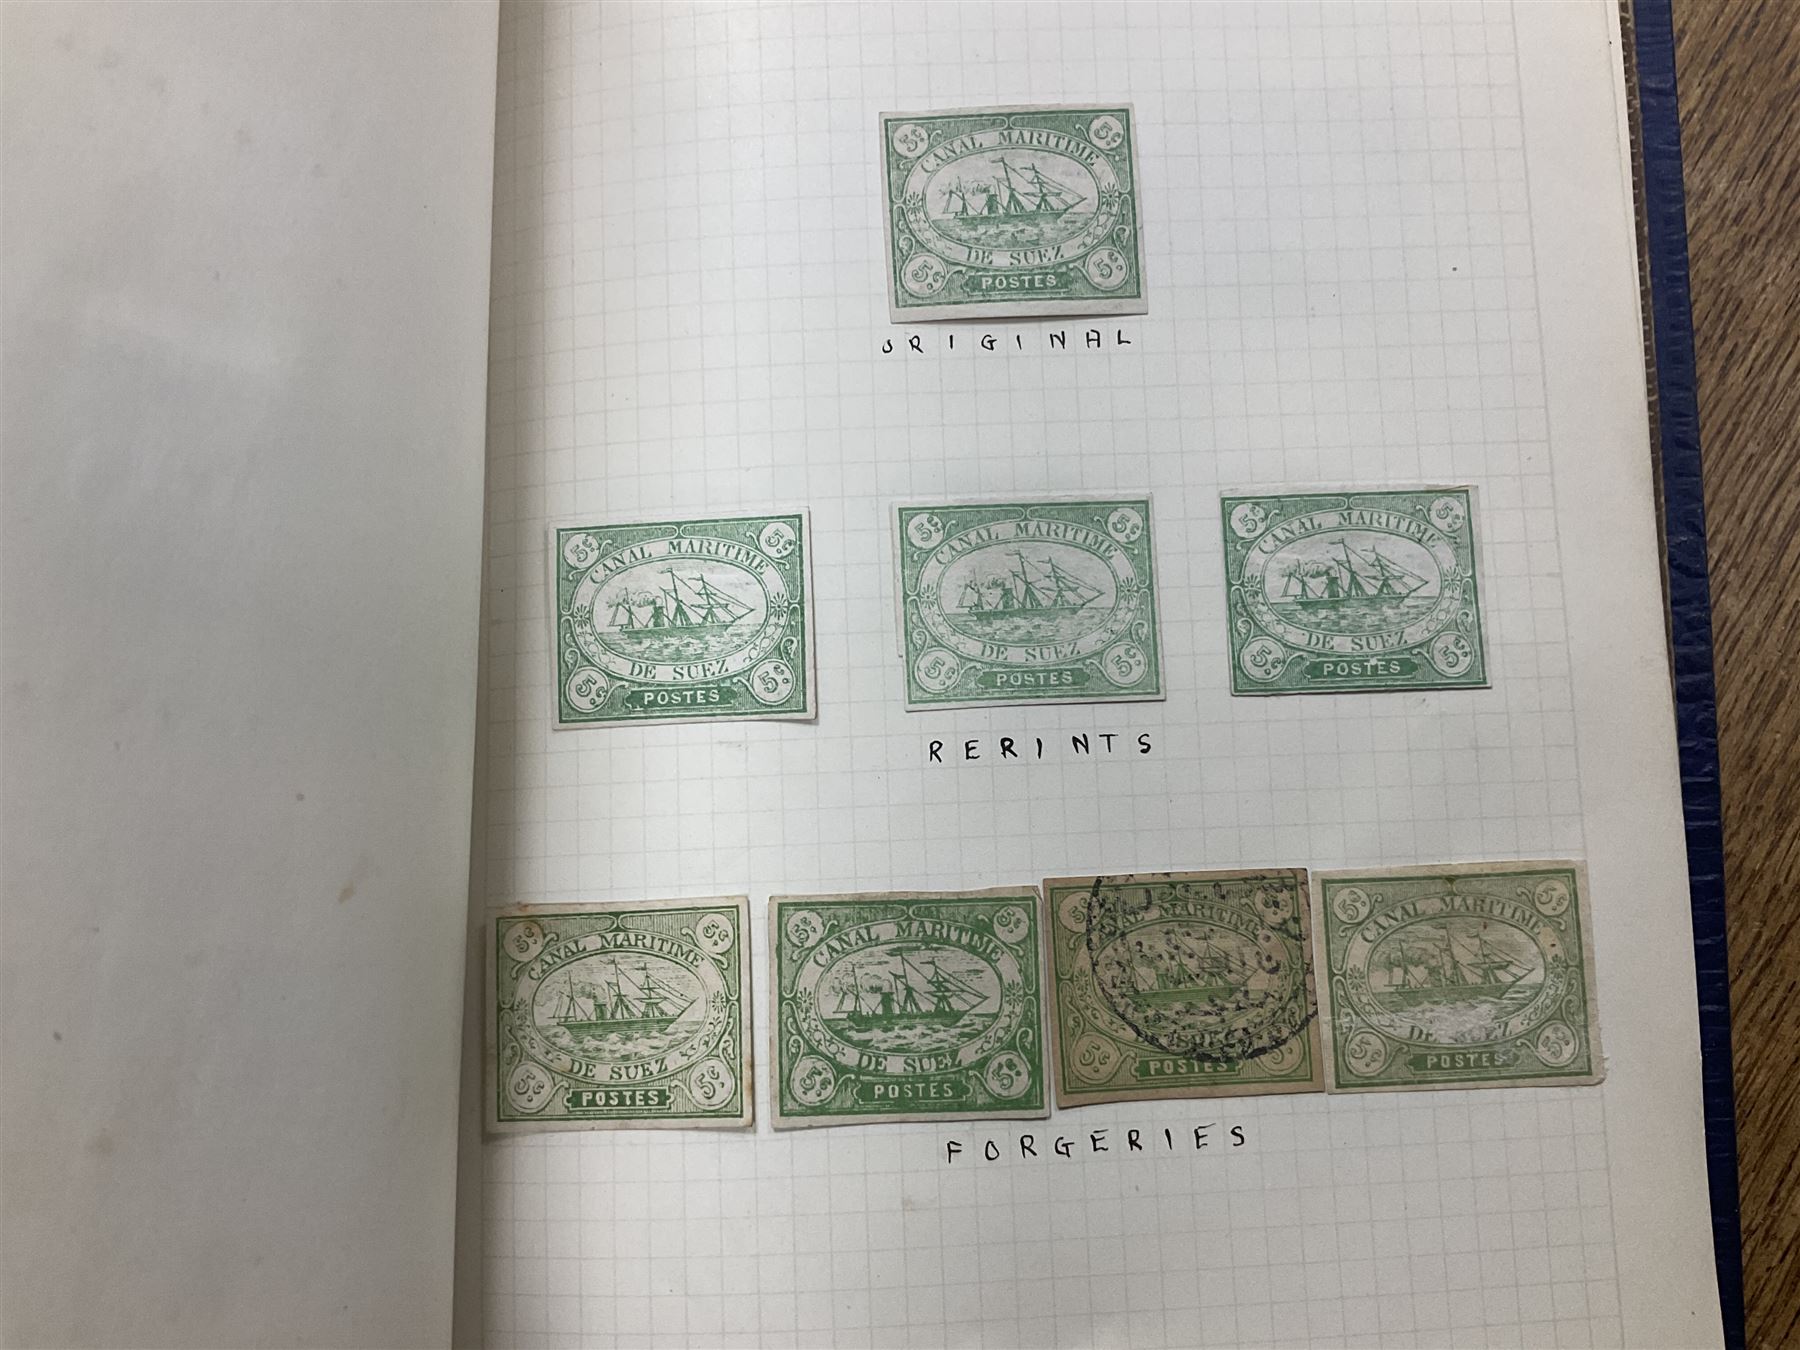 Egypt 1866 and later stamps - Image 728 of 761